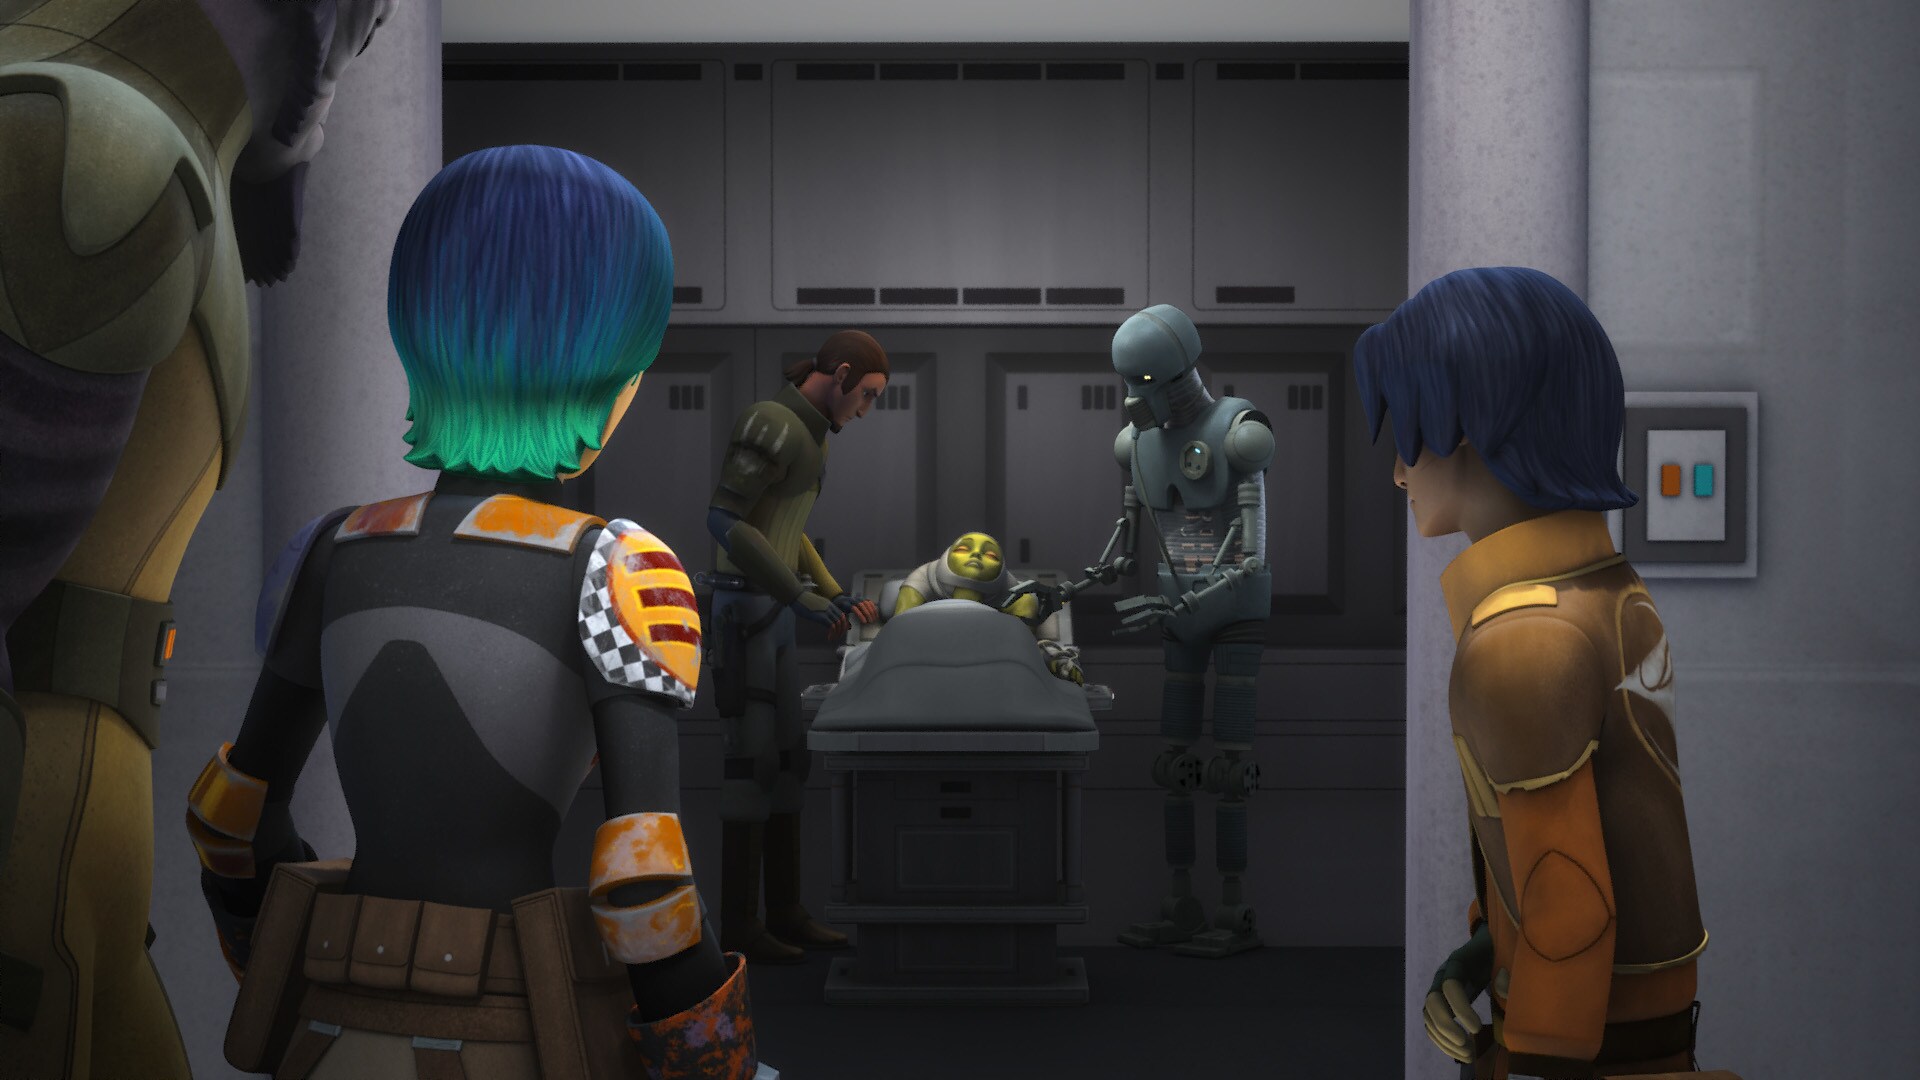 Thankfully, Hera's vital signs stabilize -- but Sabine is angry. She apologizes to an unconscious...